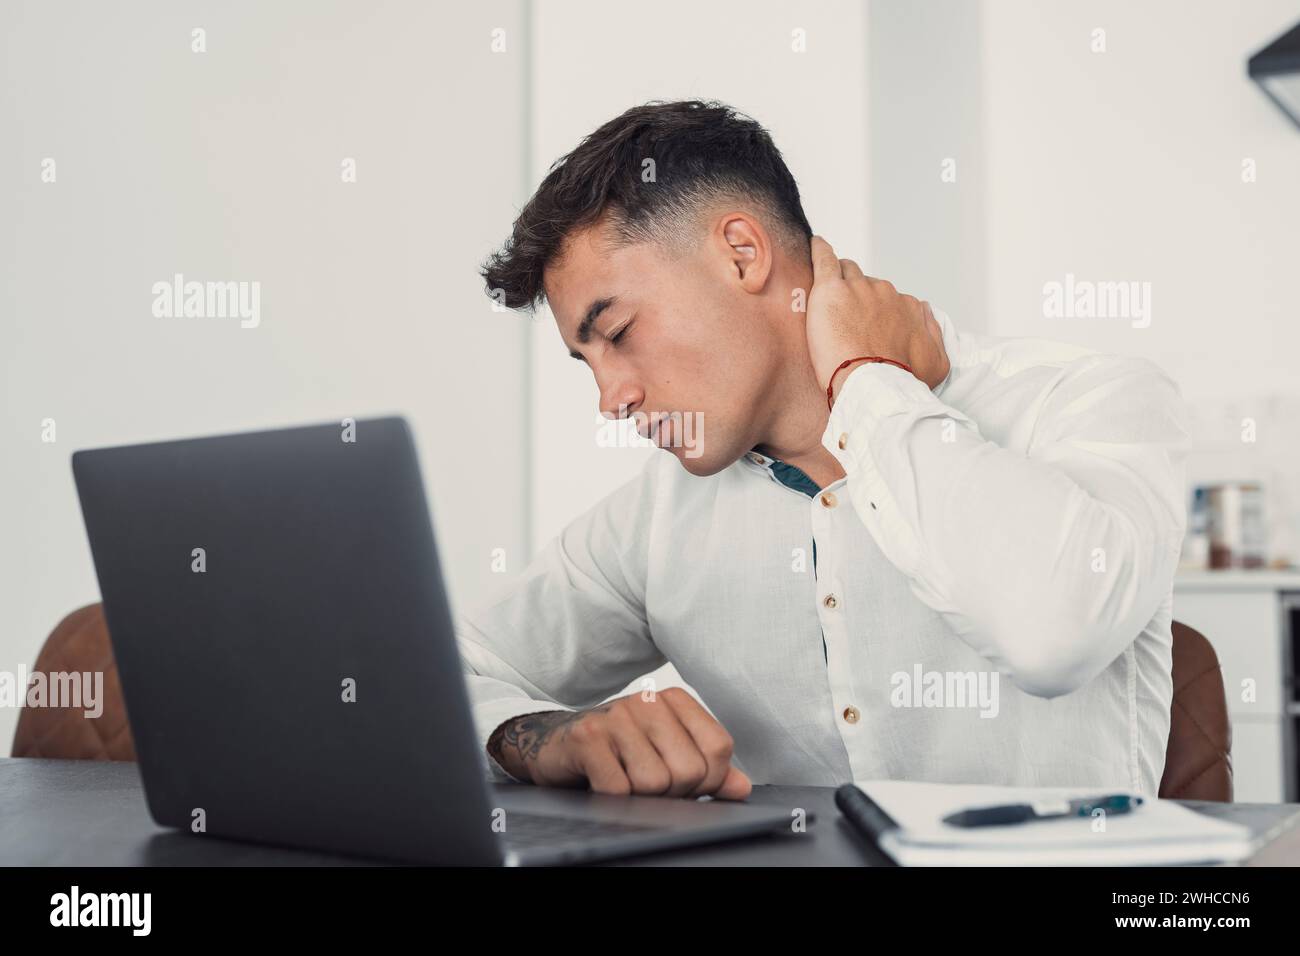 Exhausted young Caucasian male worker sit at desk massage neck suffer from strain spasm muscles. Tired unwell man overwhelmed with computer work sedentary lifestyle struggle with back pain or ache. Stock Photo